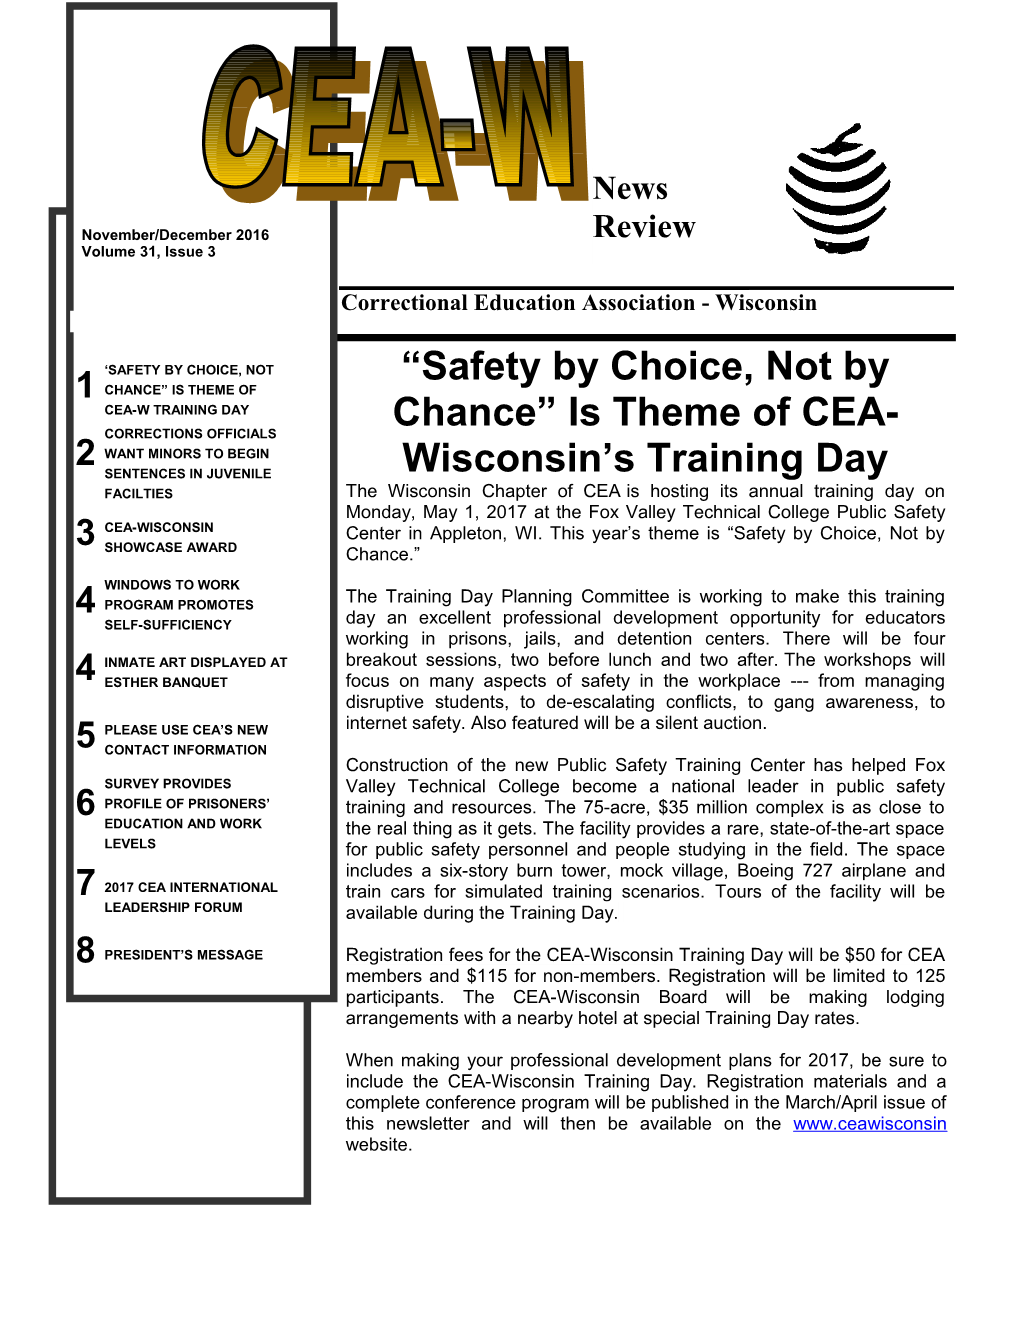 Safety by Choice, Not by Chance Is Theme of CEA-Wisconsin S Training Day